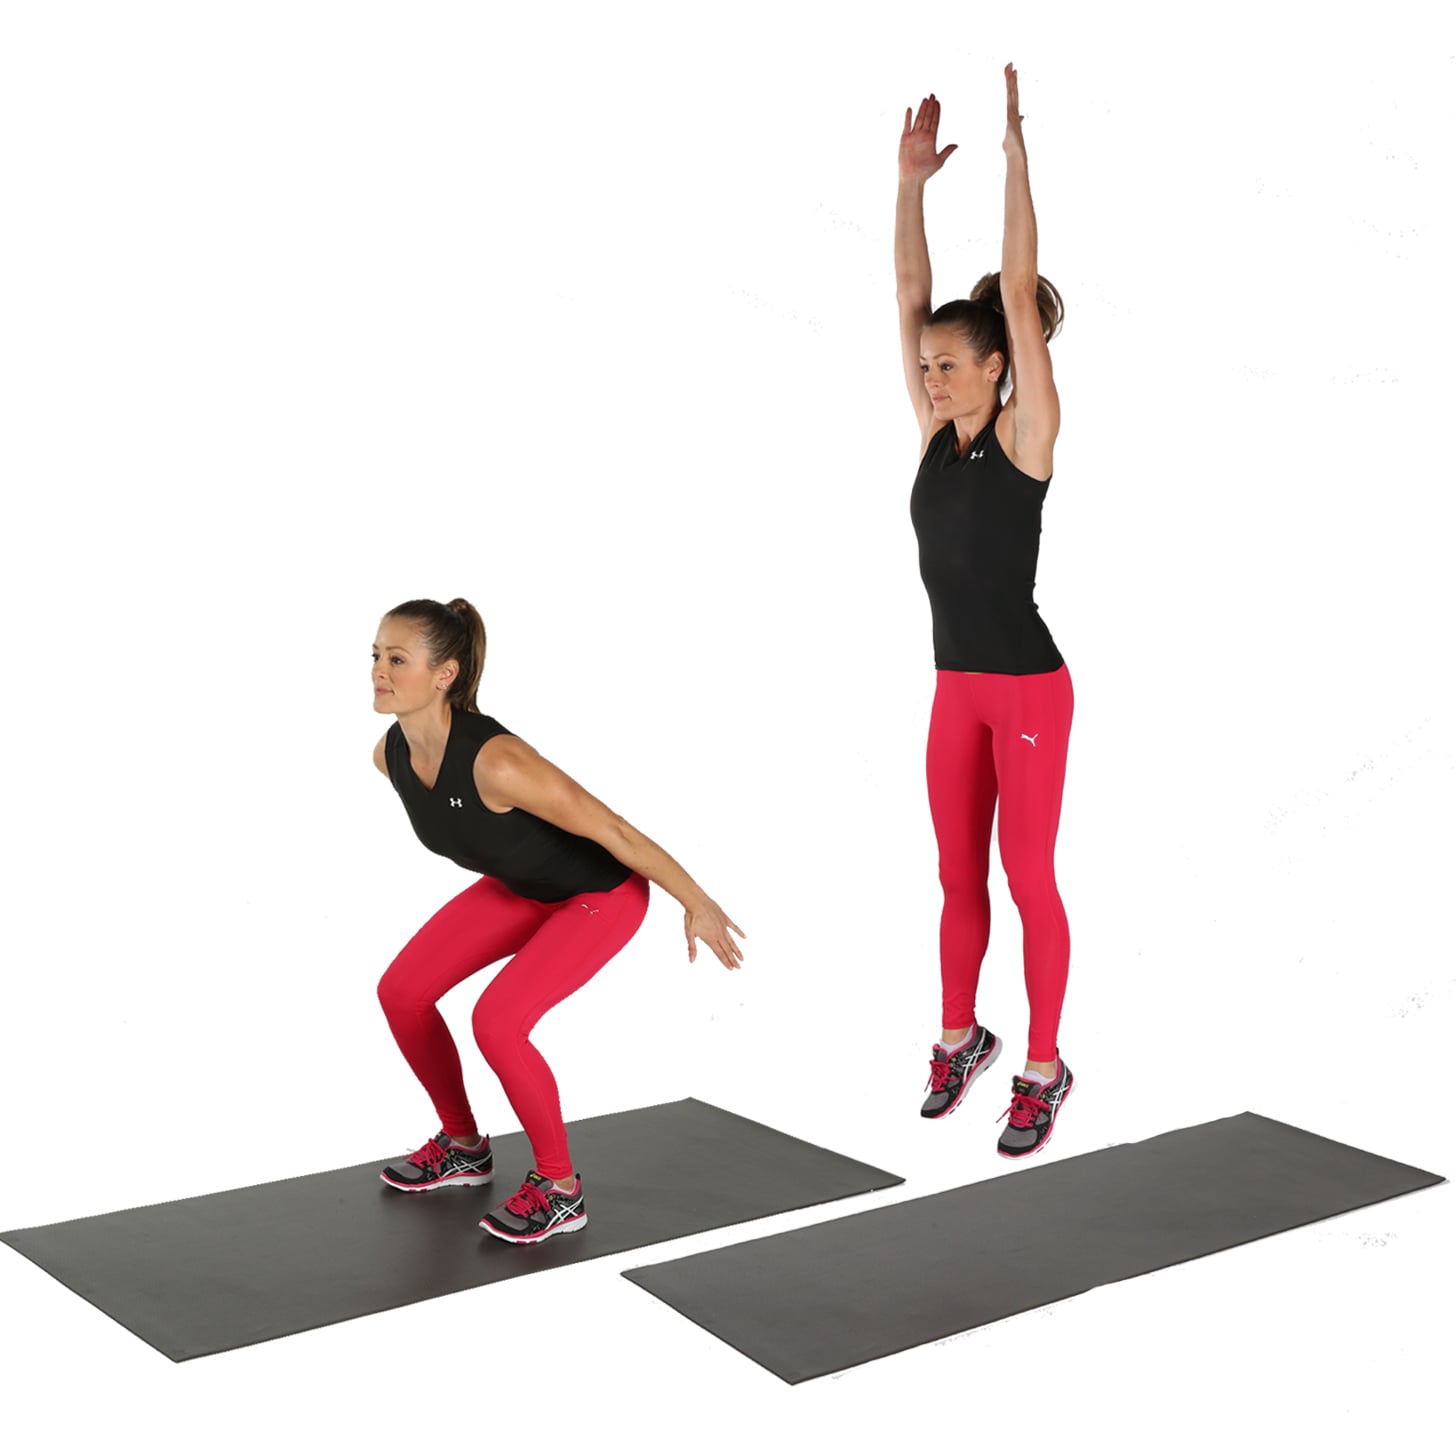 Squat Jump - Form and Fitness